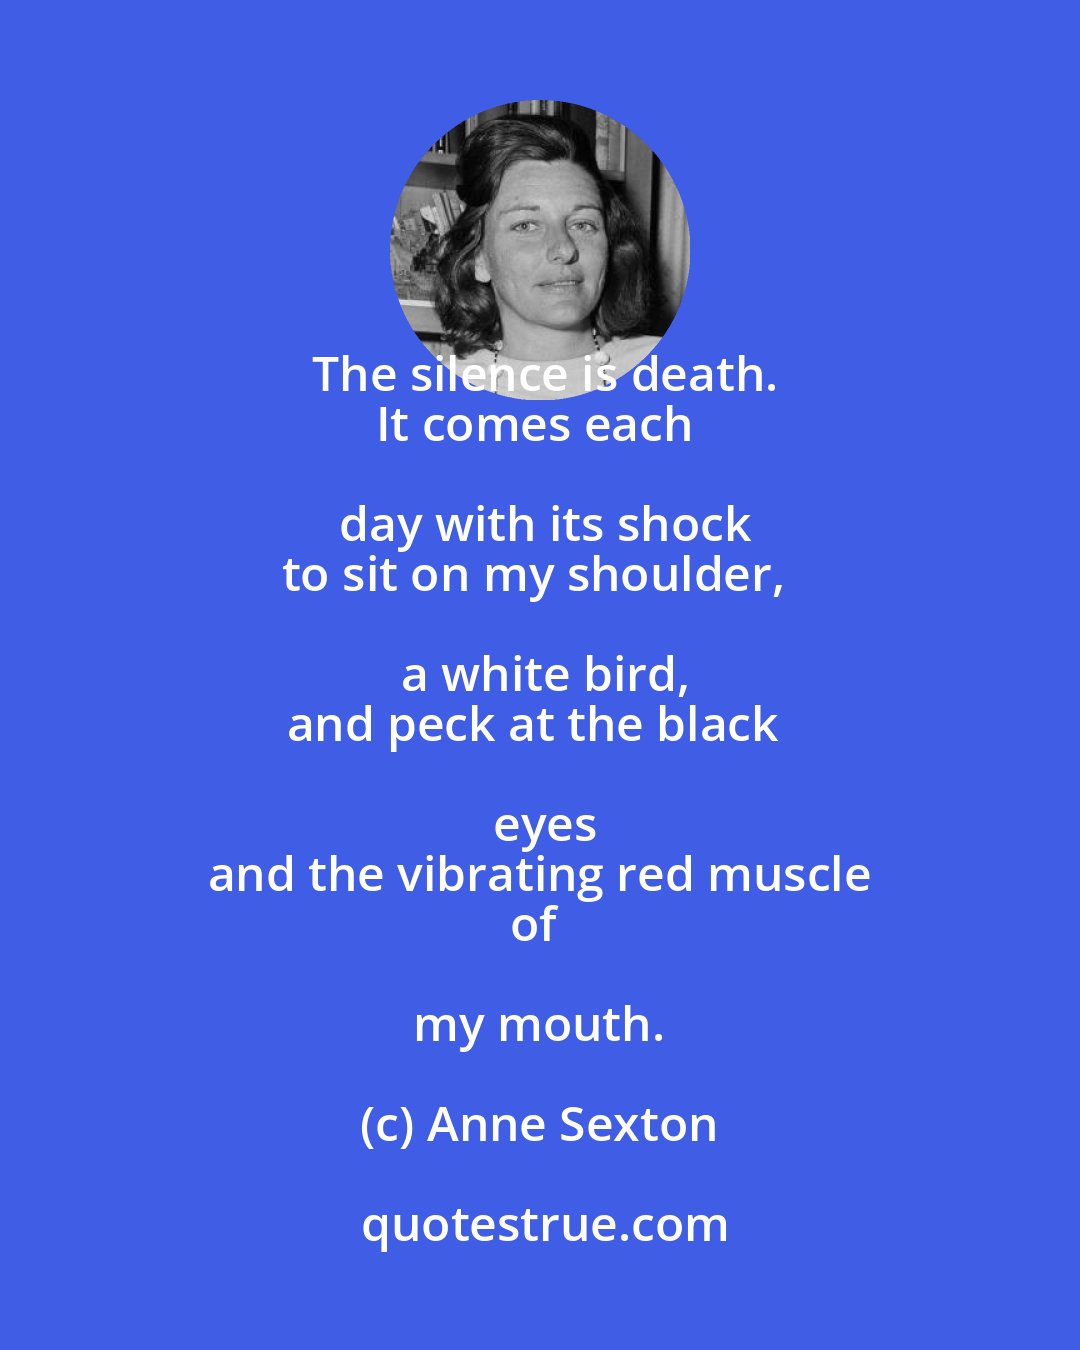 Anne Sexton: The silence is death.
It comes each day with its shock
to sit on my shoulder, a white bird,
and peck at the black eyes
and the vibrating red muscle
of my mouth.